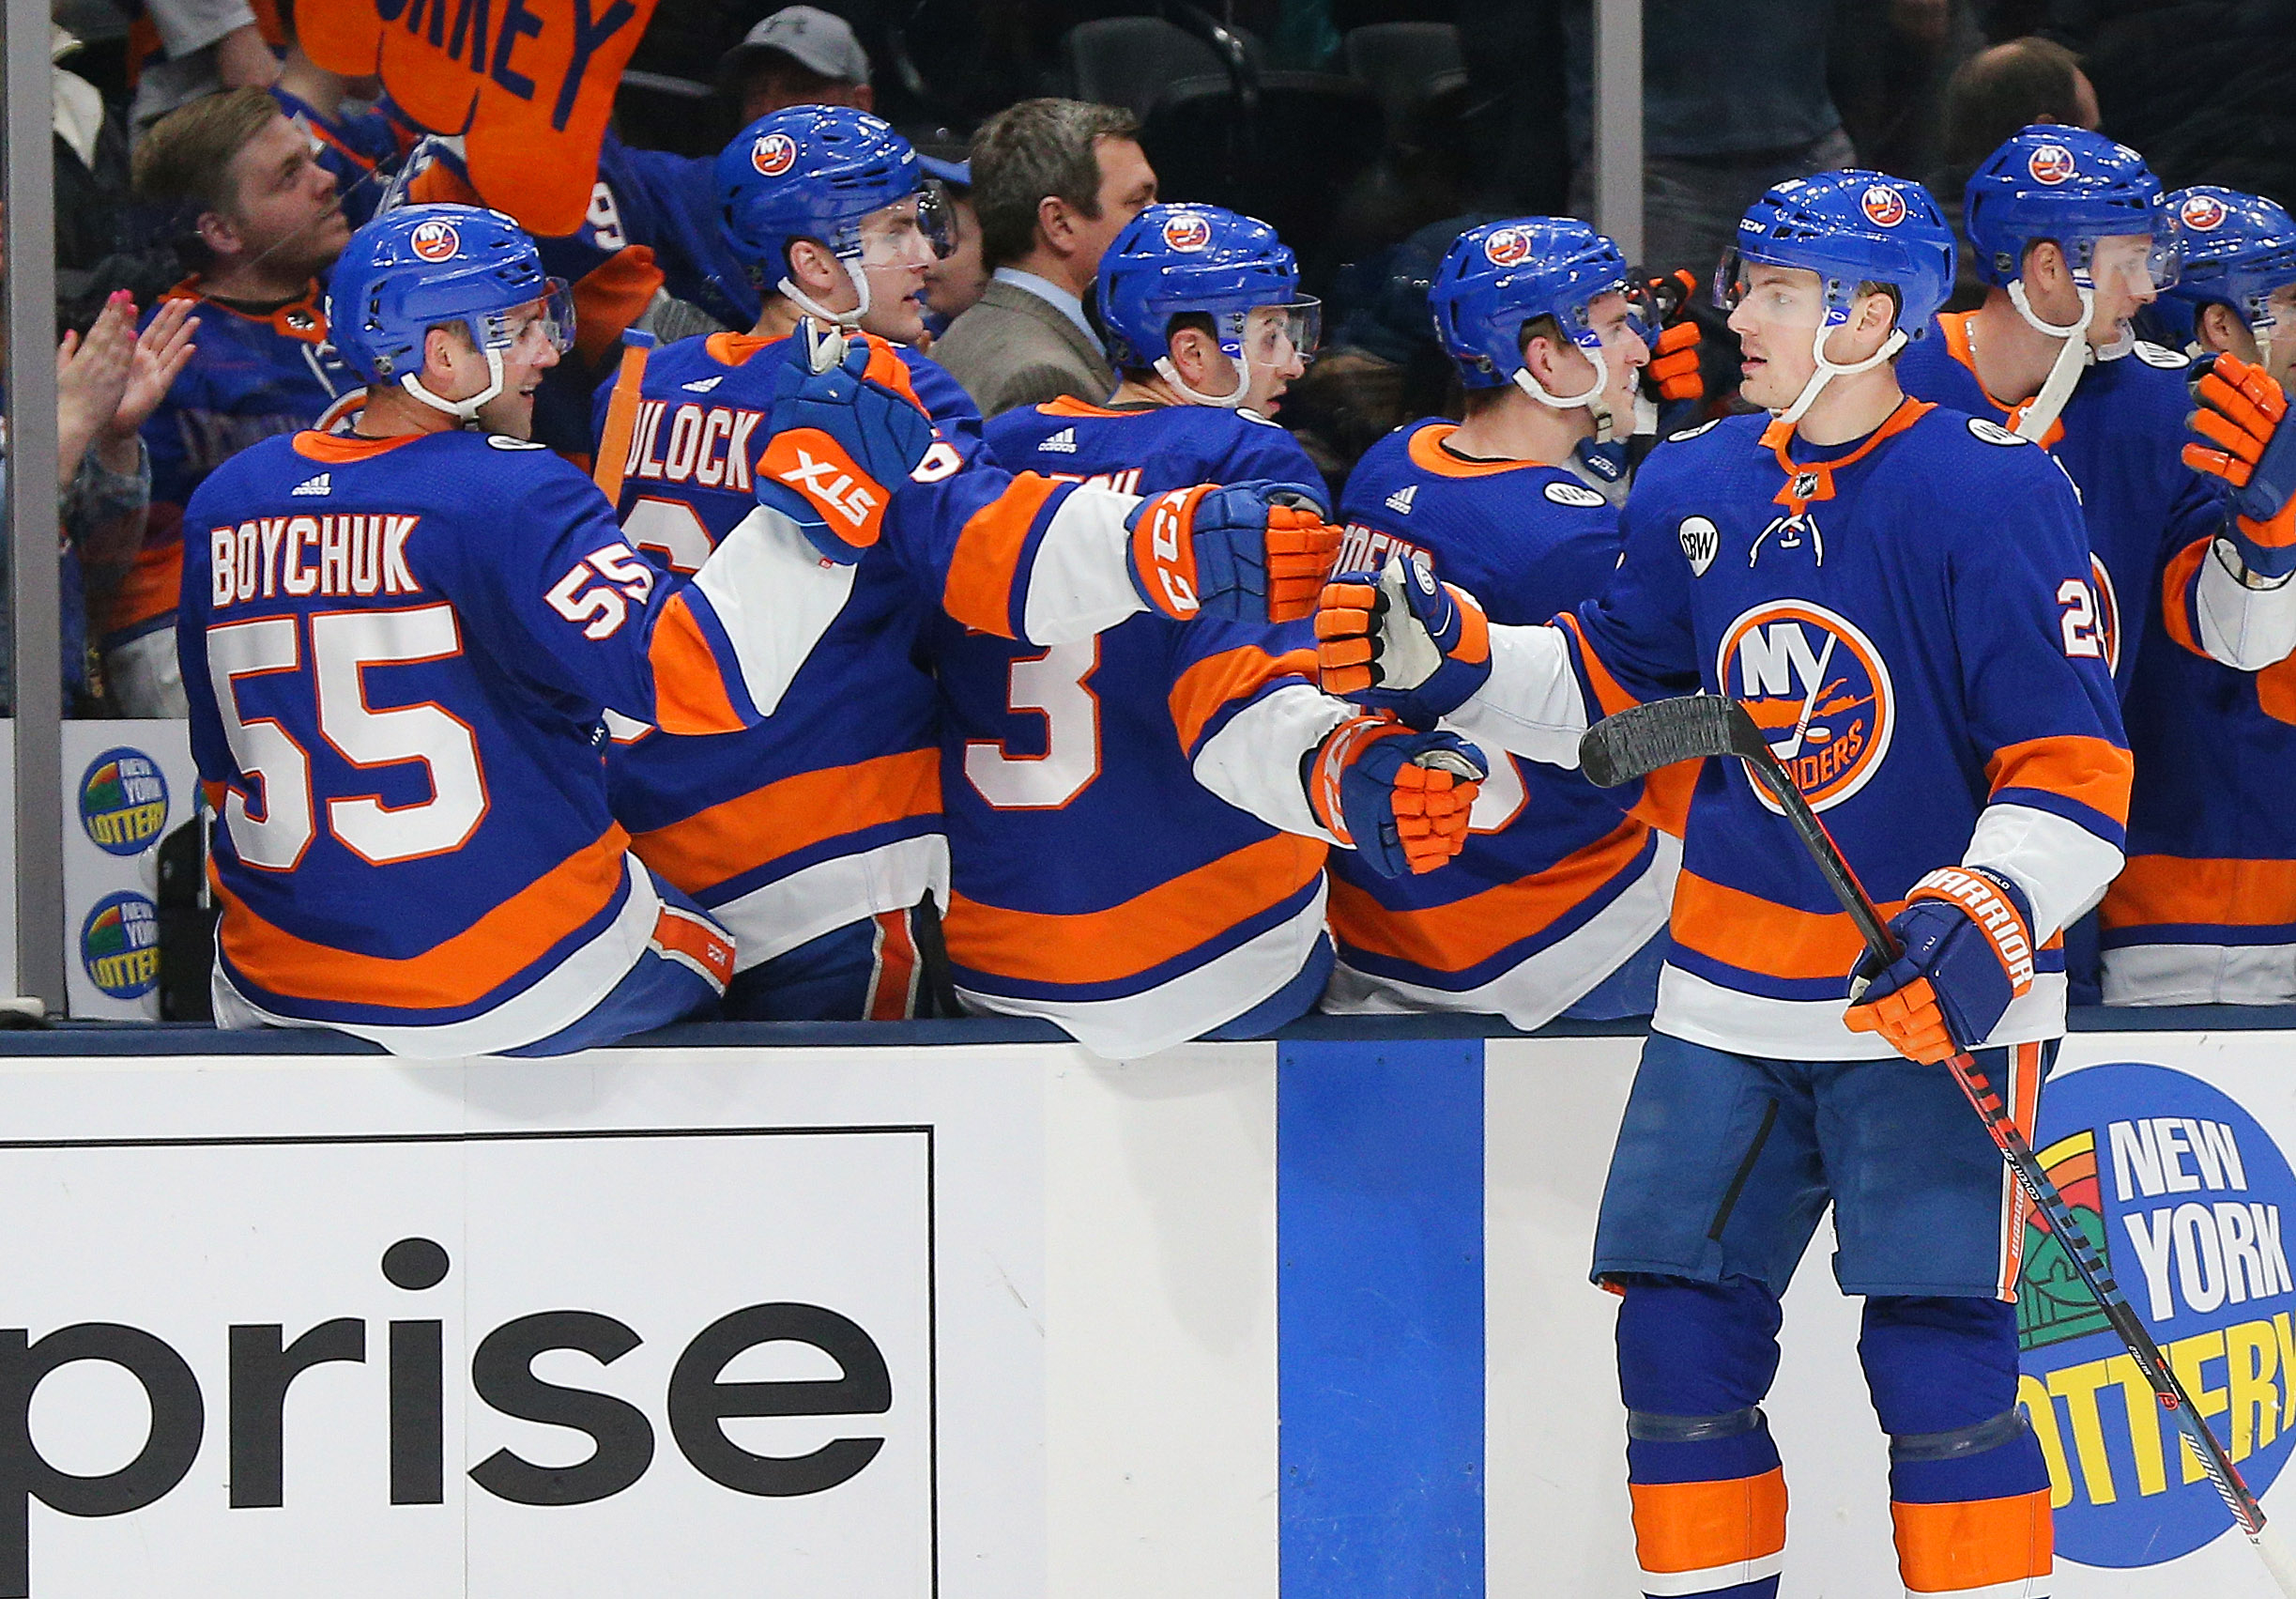 Mar 9, 2019; Uniondale, NY, USA; New York Islanders defenseman Scott Mayfield (24) is congratulated after scoring a goal against the Philadelphia Flyers during the first period at Nassau Veterans Memorial Coliseum. Mandatory Credit: Andy Marlin-USA TODAY Sports